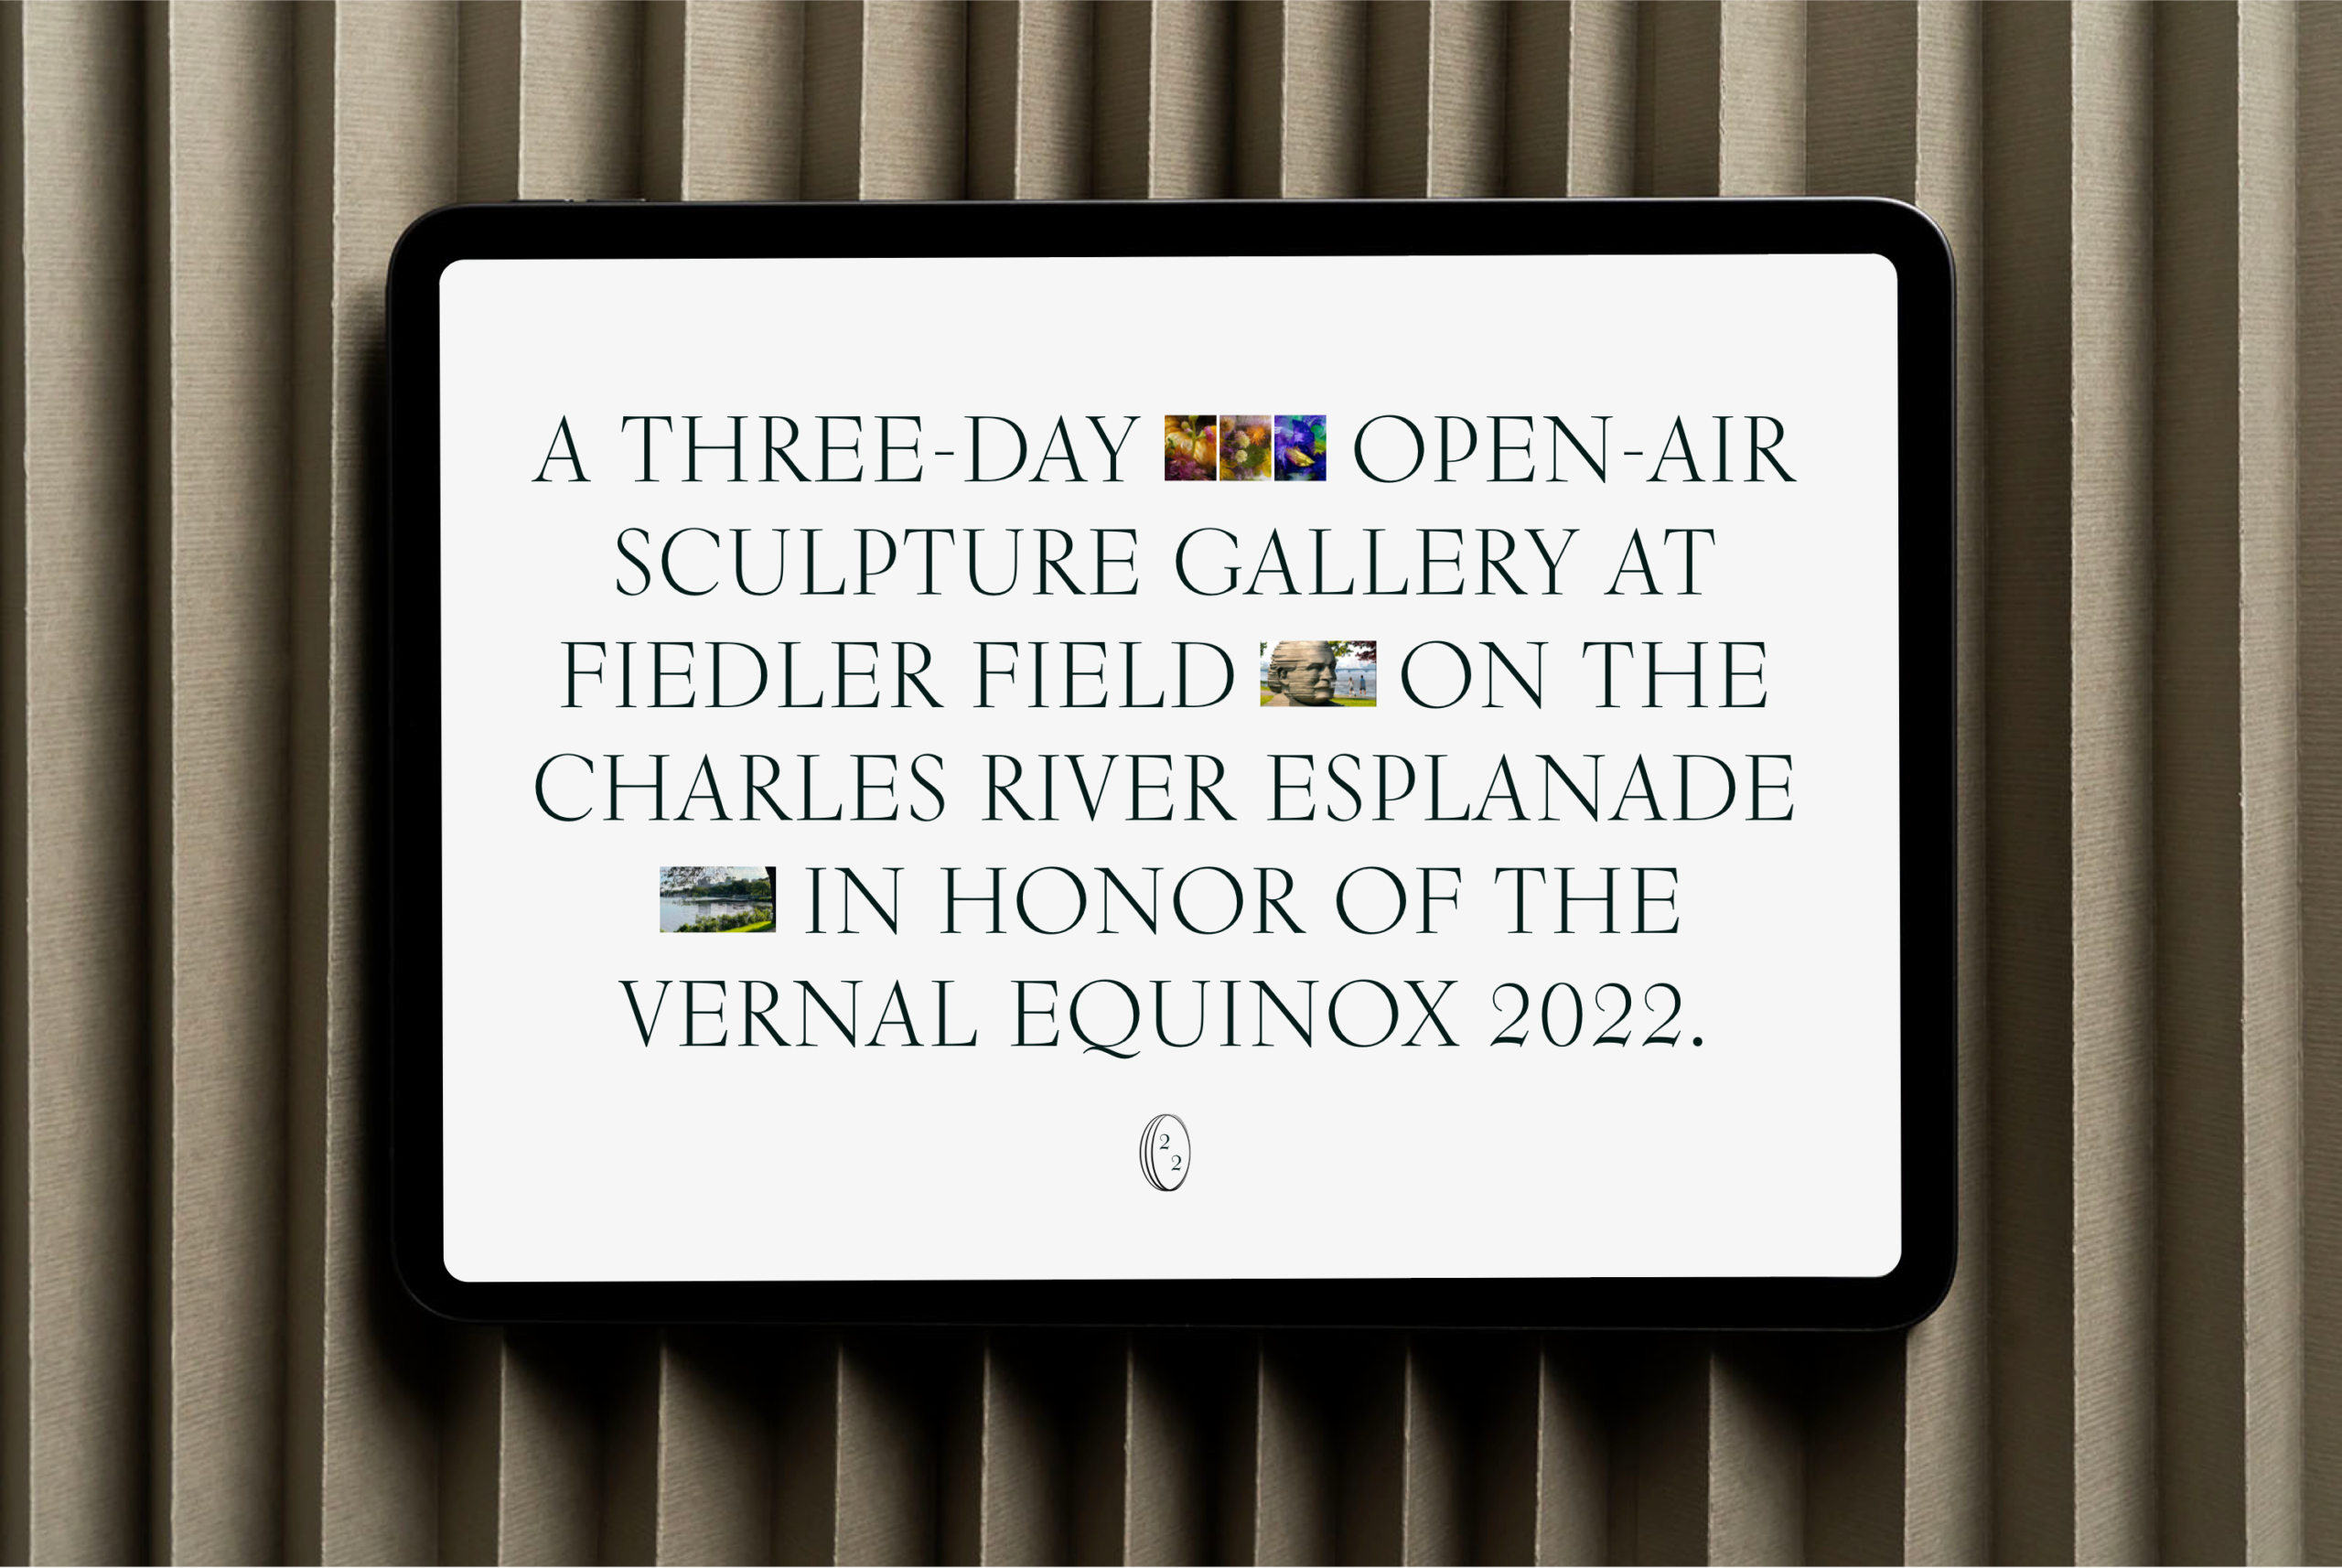 A tablet is in the foreground stating “A three-day open-air sculpture gallery on for Fielder field on the Charles River Esplanade in honor of the Vernal Equinox 2022”. Small images of Anna’s art feature.